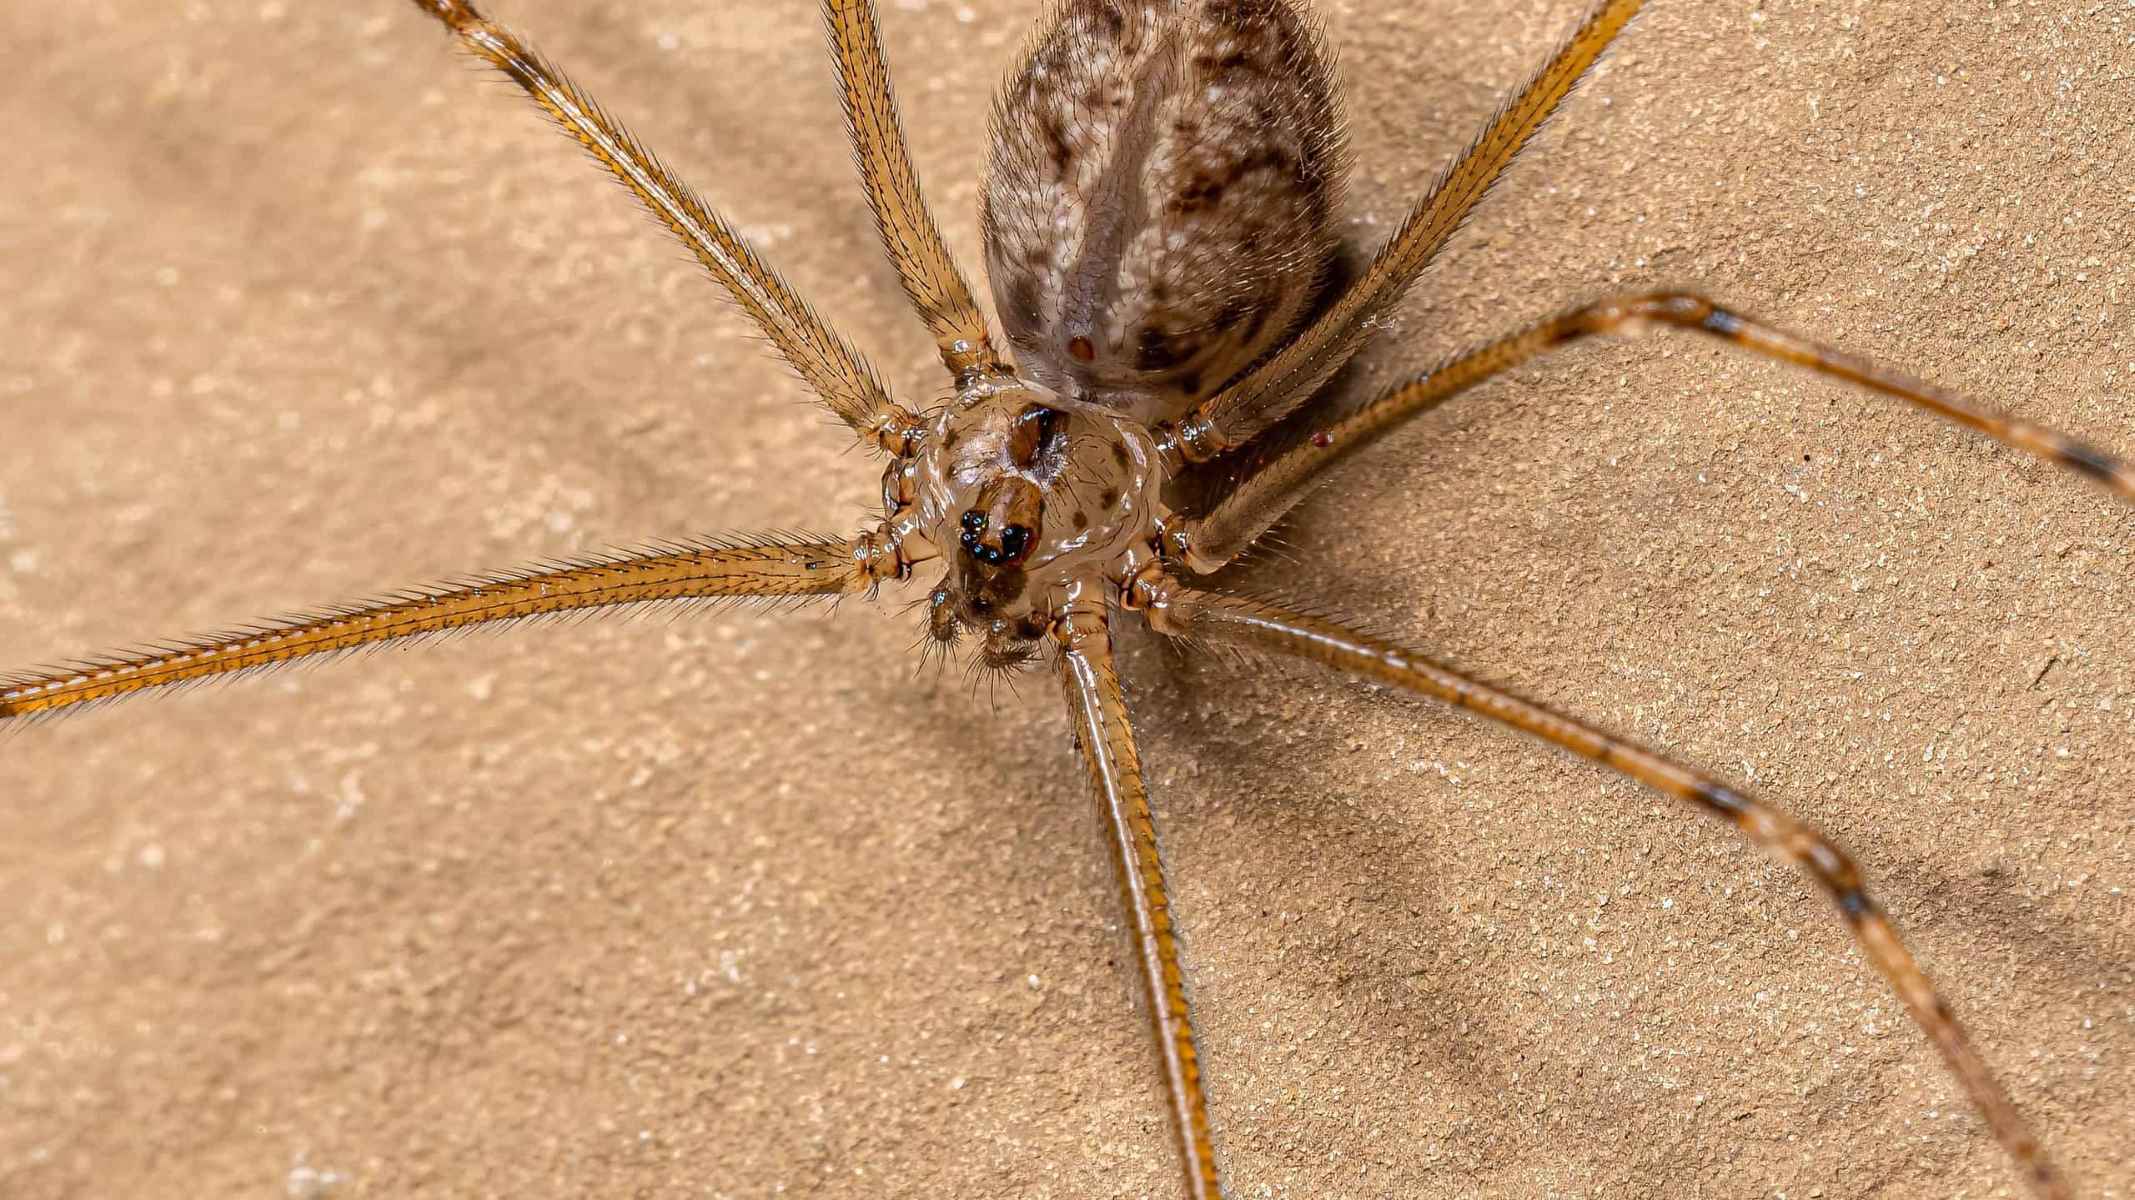 13-astounding-facts-about-giant-daddy-long-legs